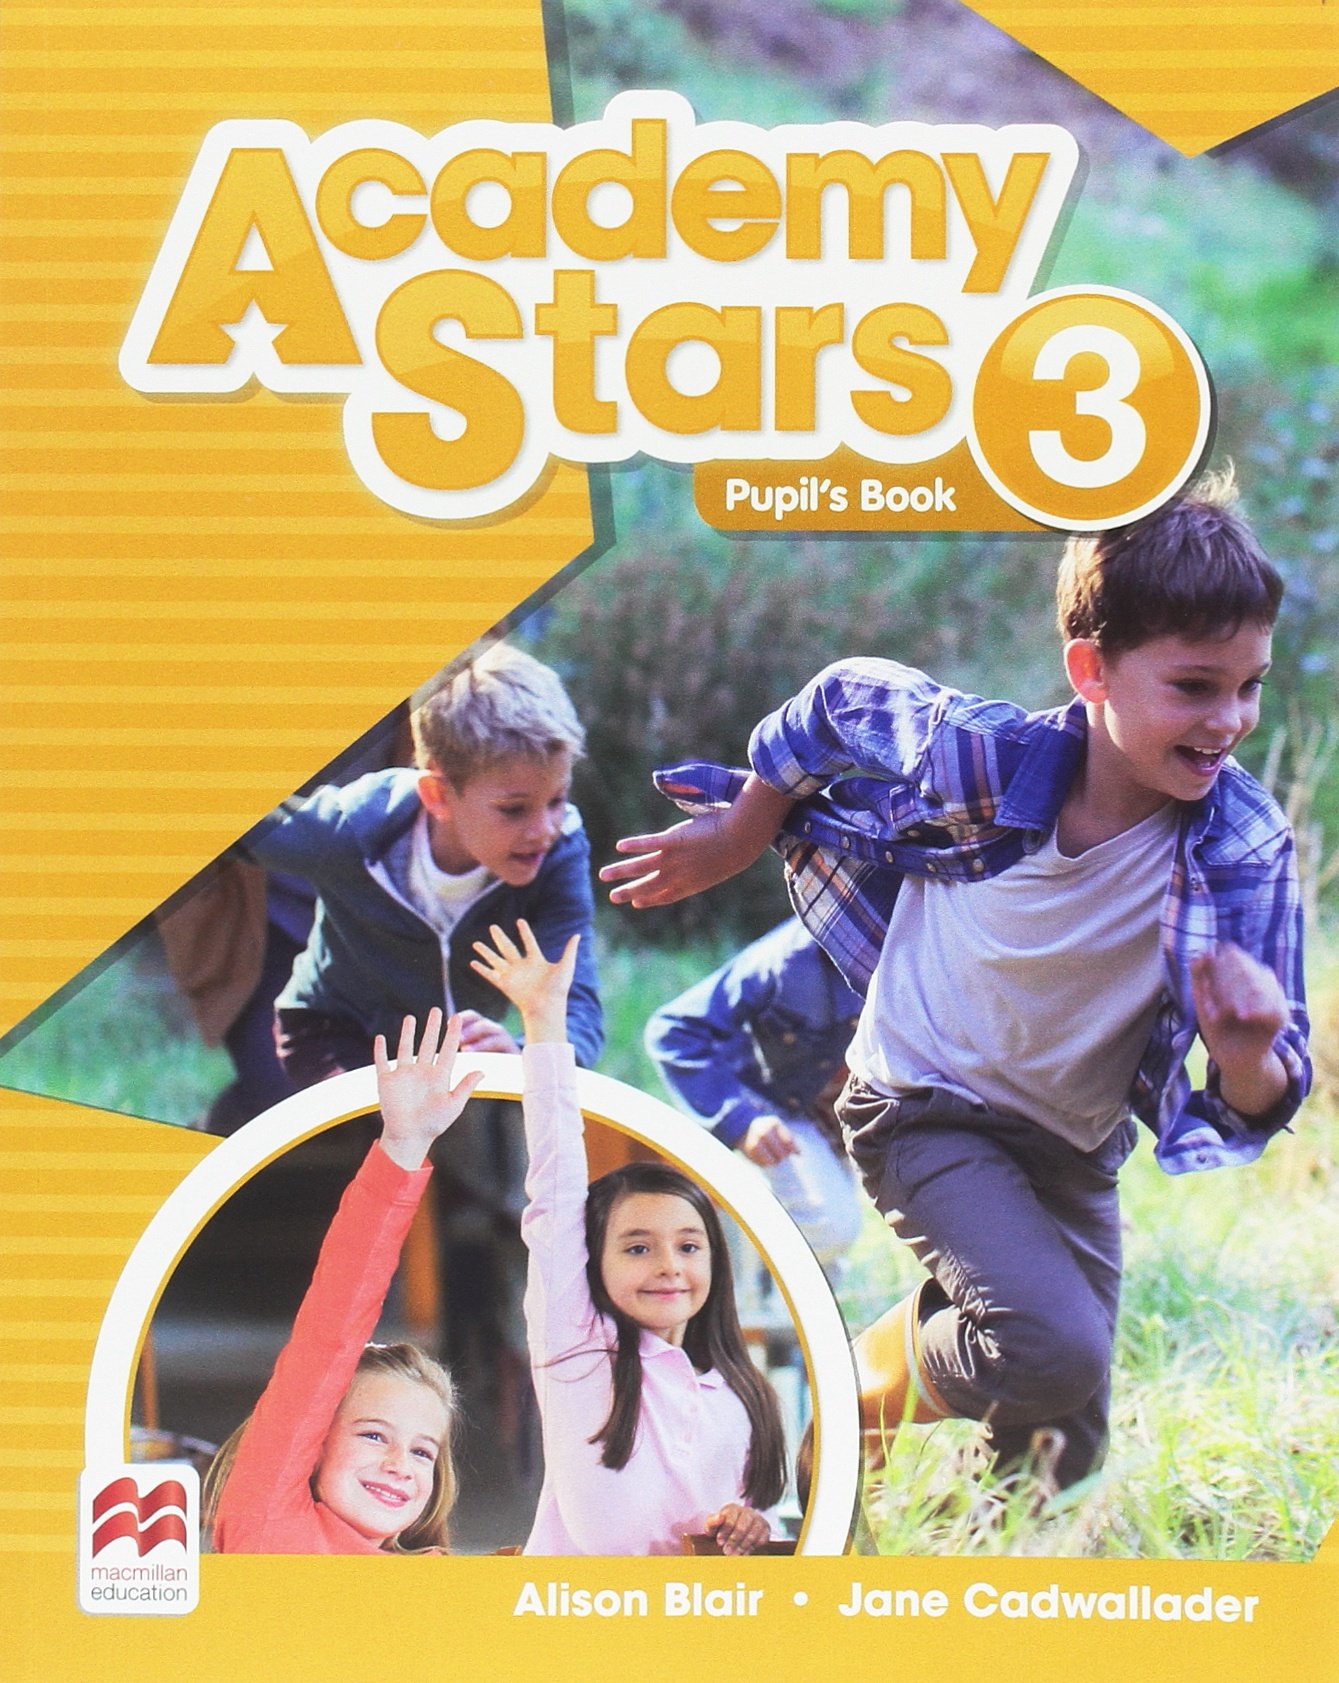 ACADEMY STARS 3 Pupil's Book Pack